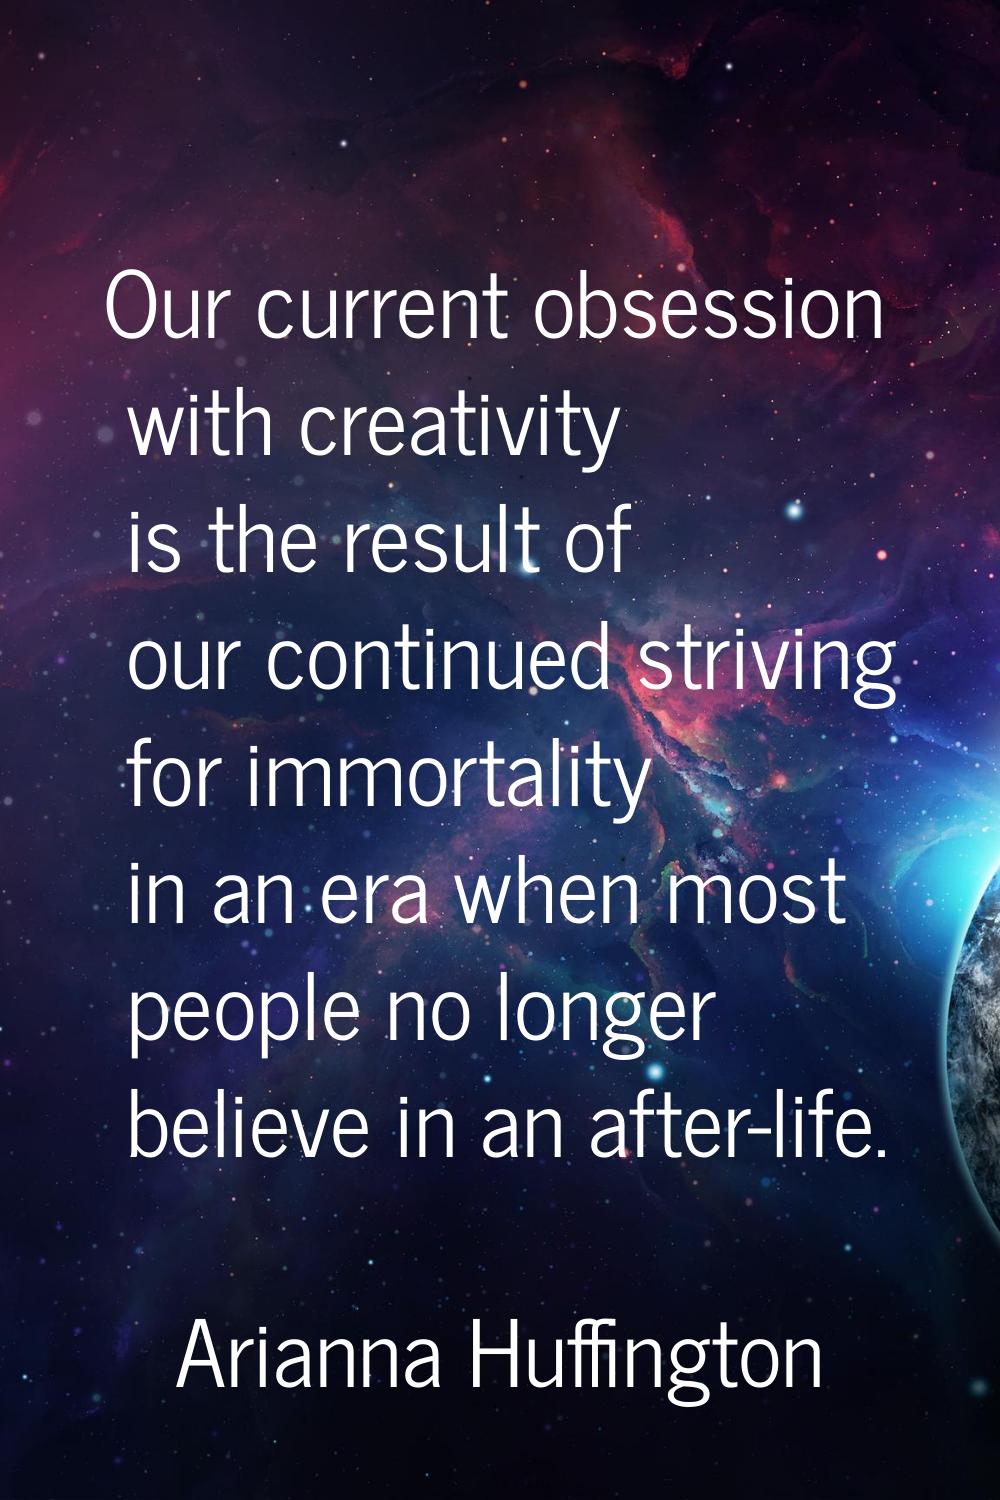 Our current obsession with creativity is the result of our continued striving for immortality in an